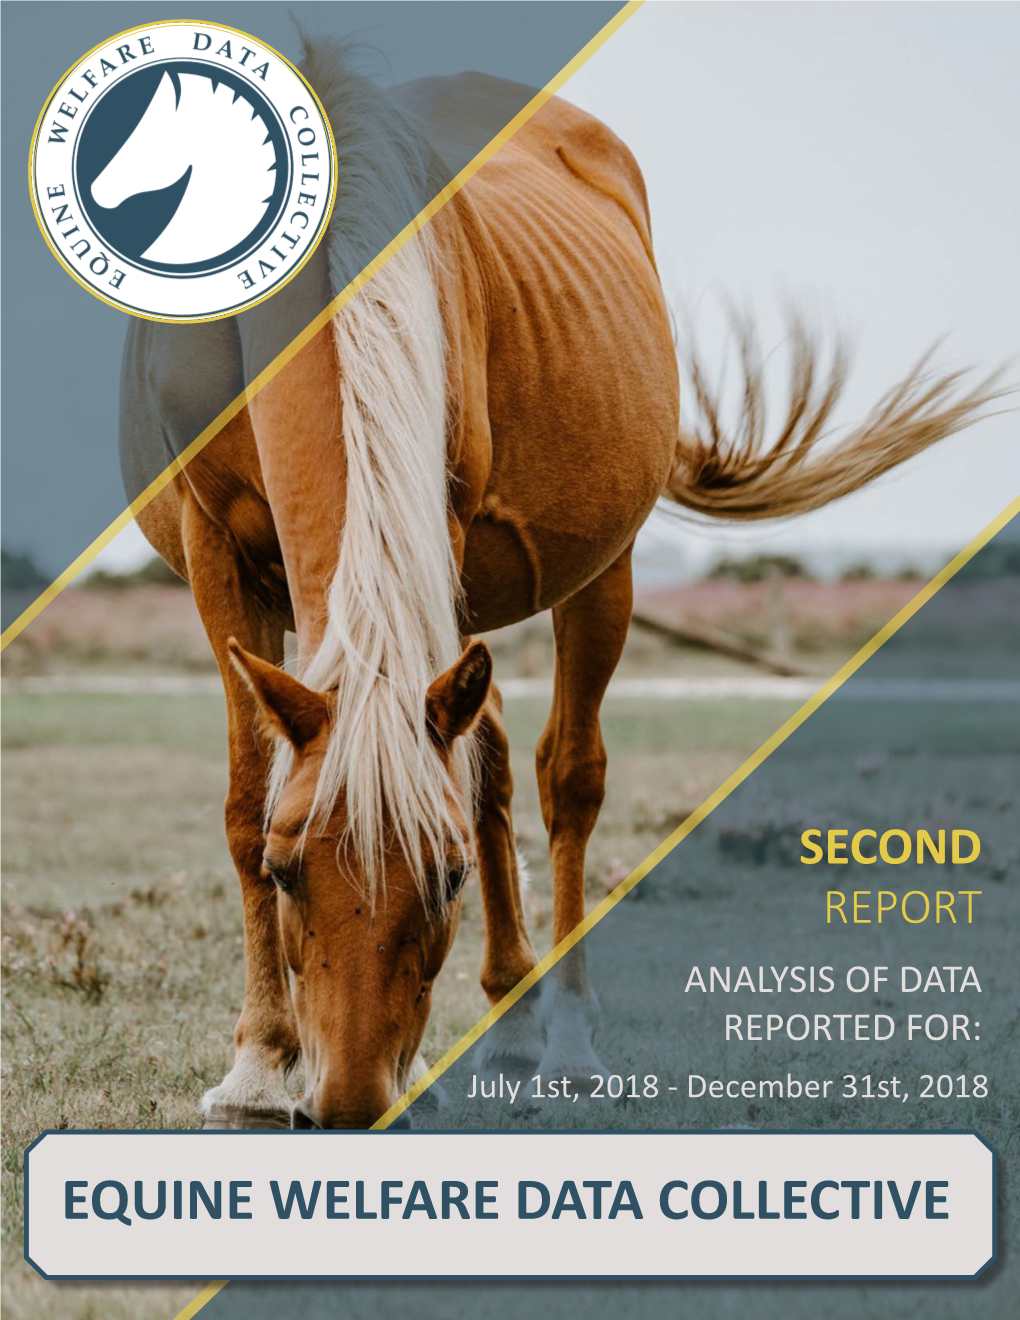 Equine Welfare Data Collective Table of Contents